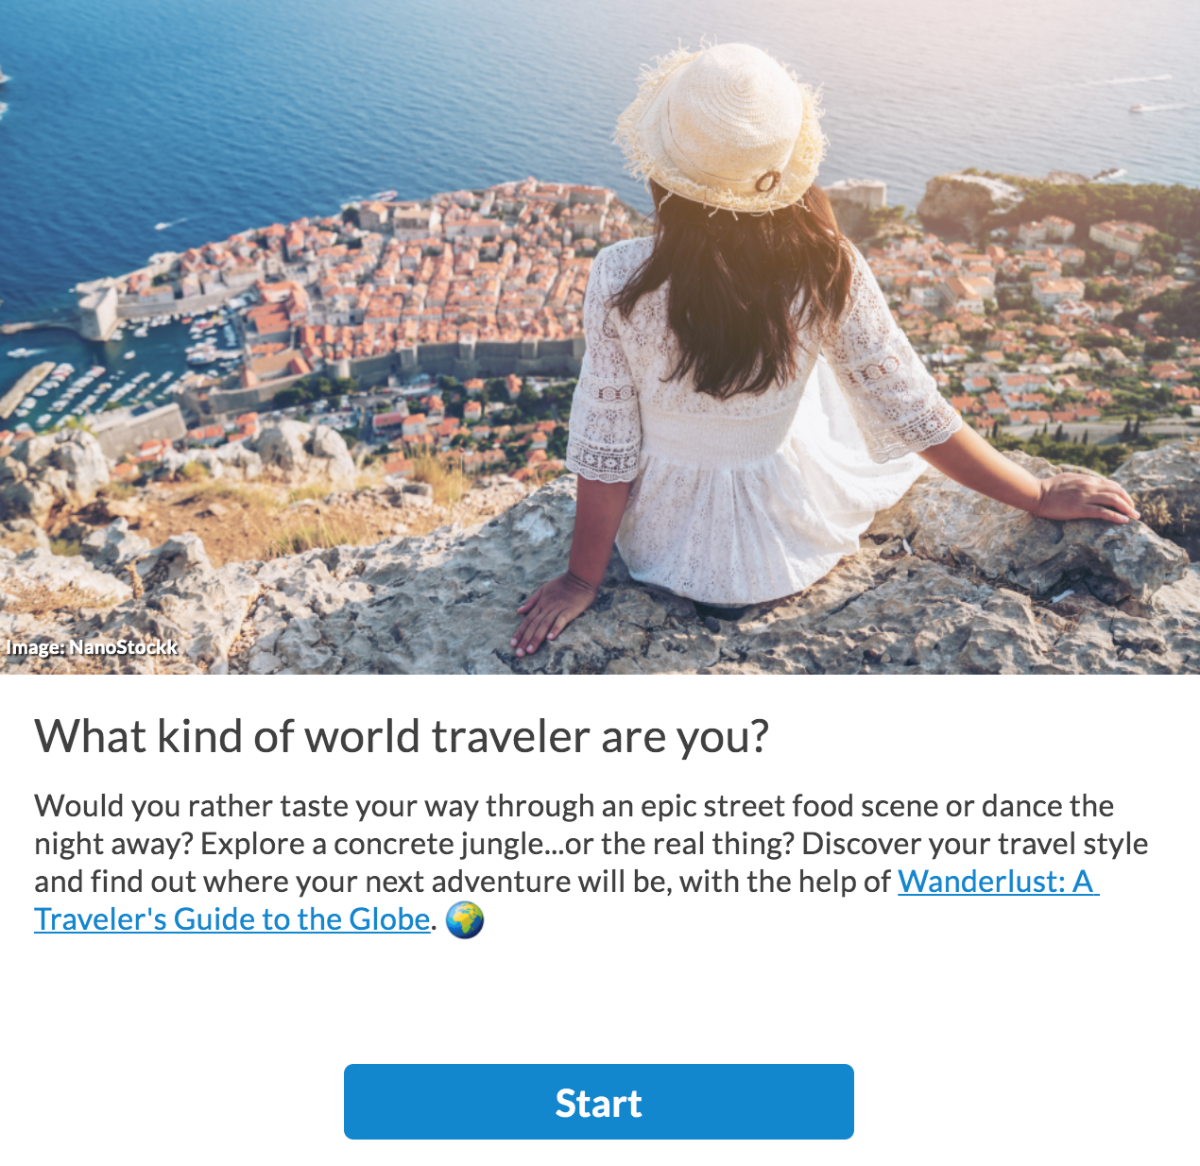 What kind of world traveler are you?